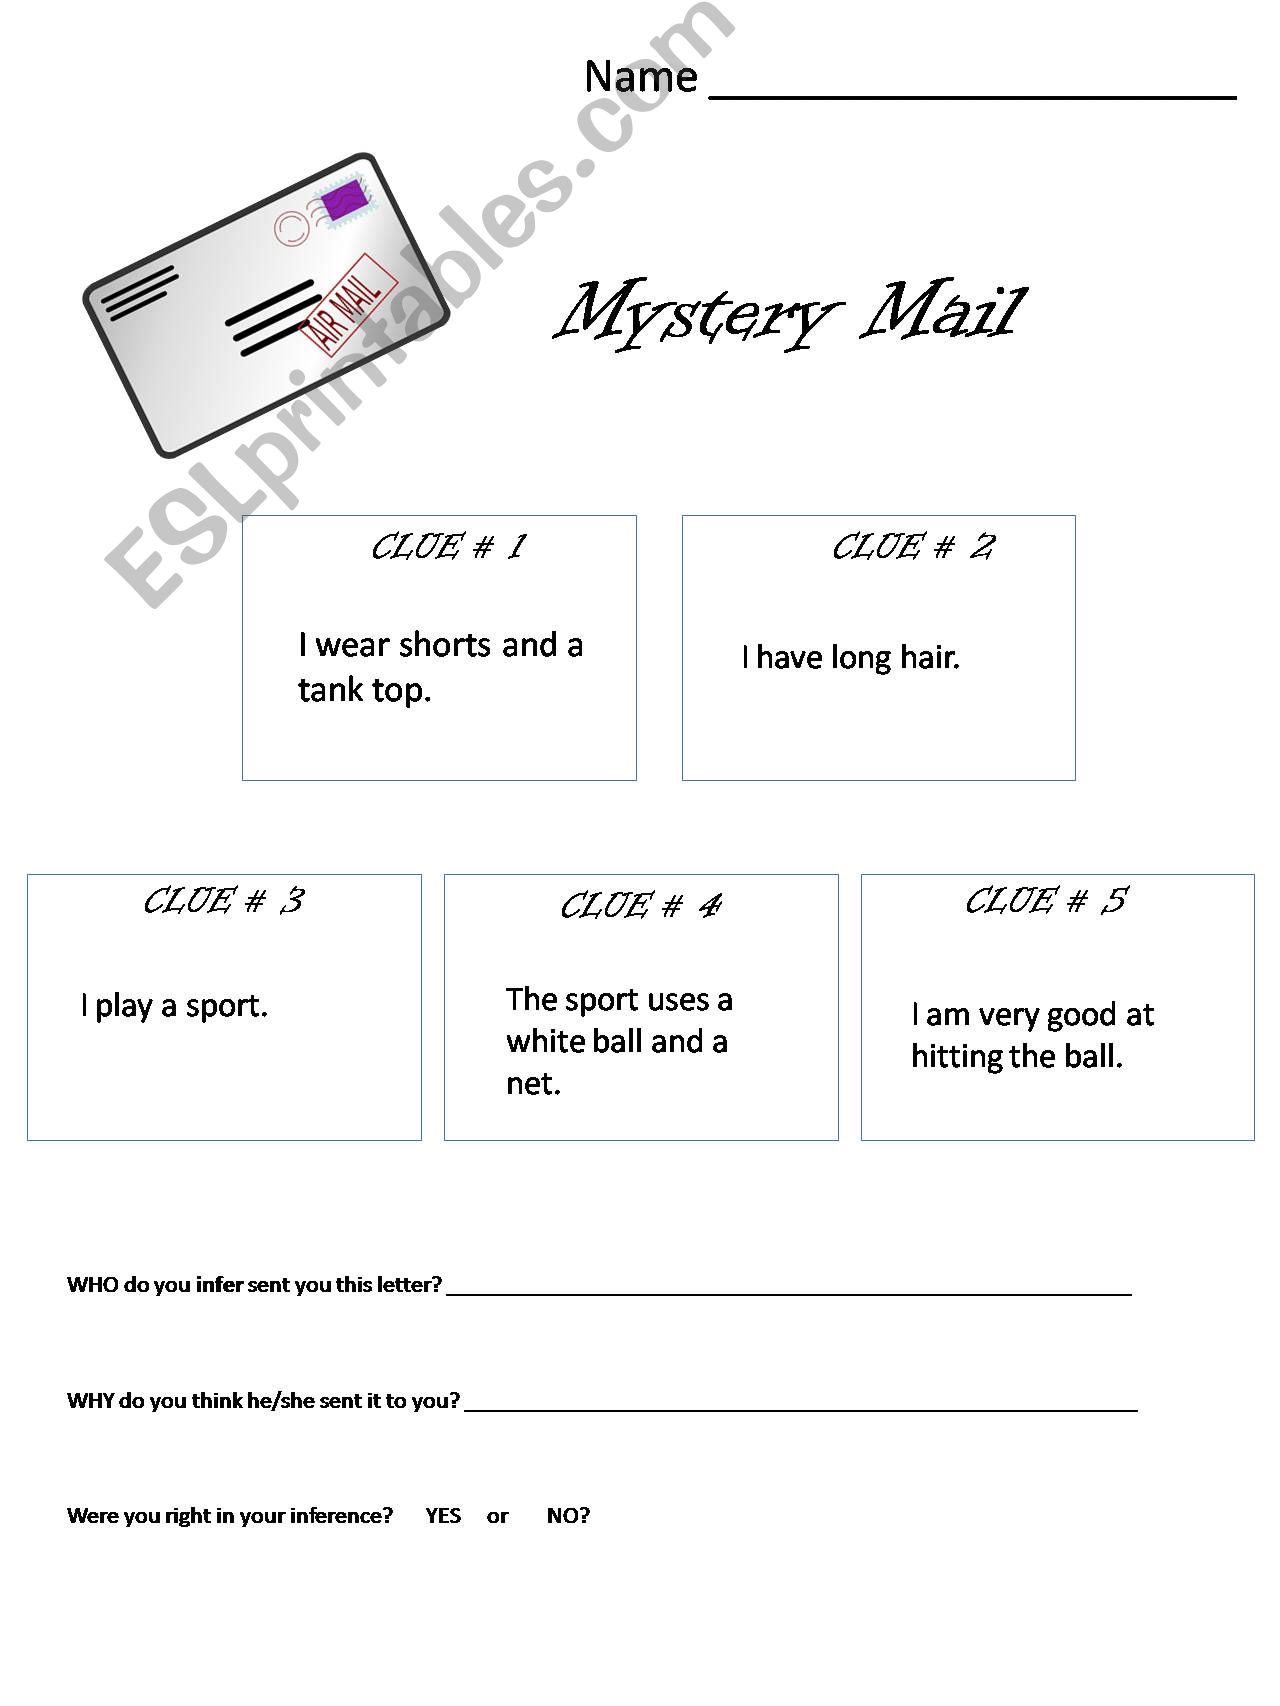 Mystery Mail 4 powerpoint